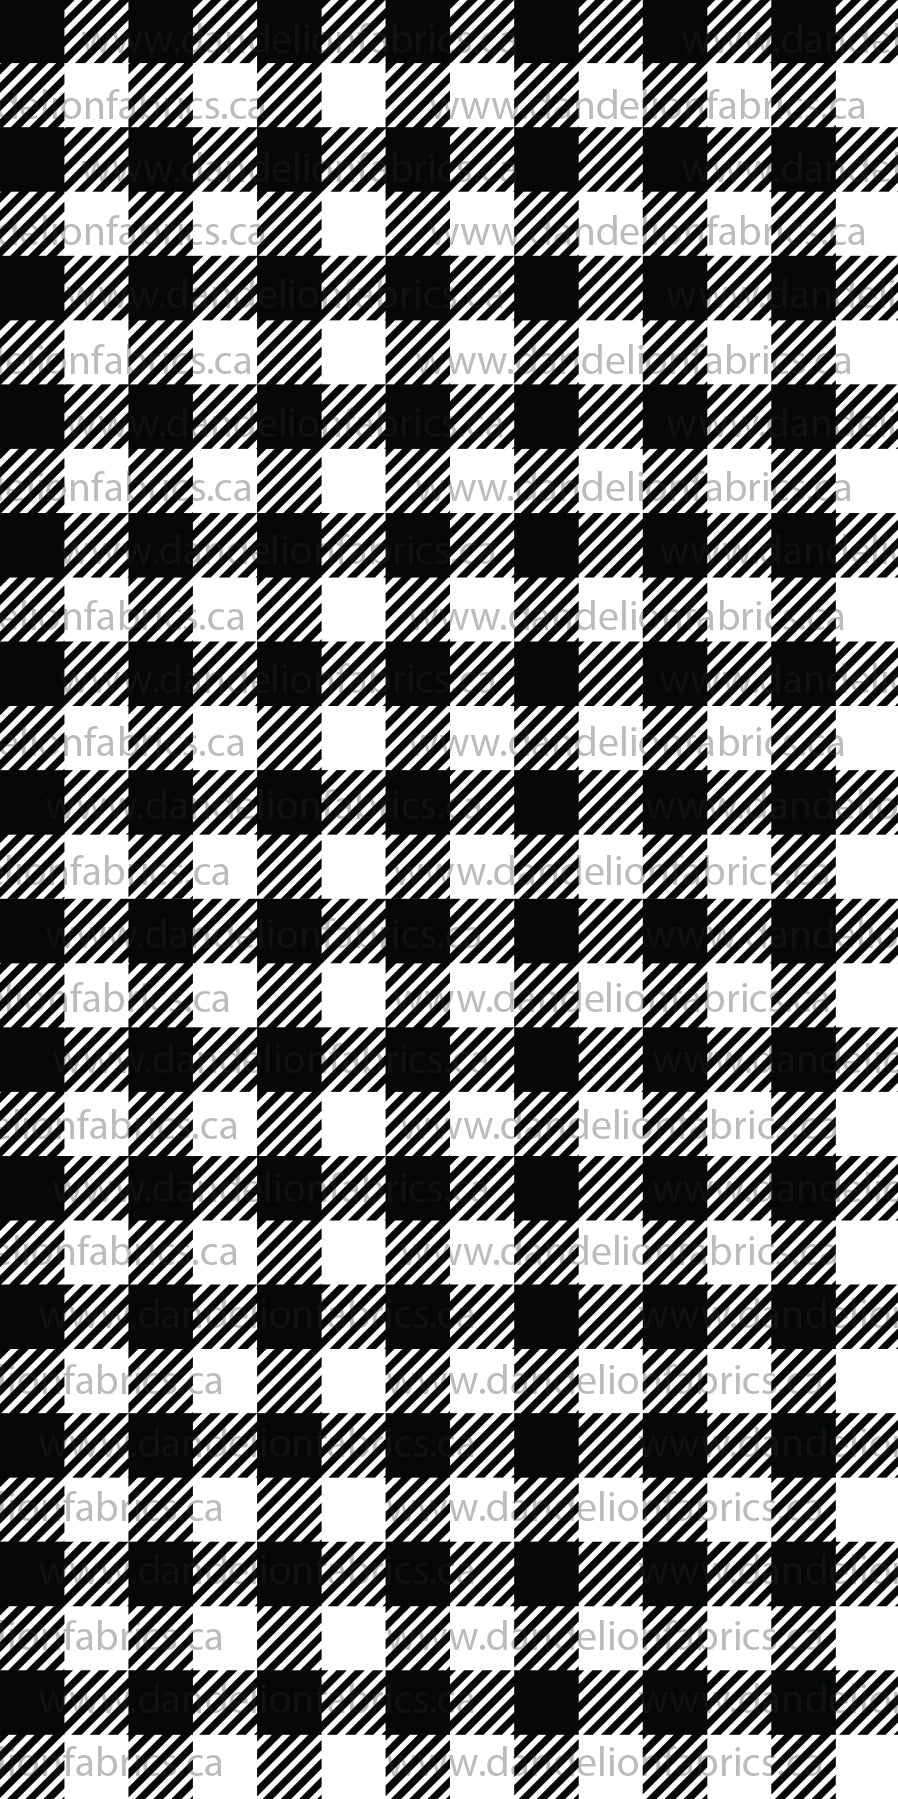 Spring Gingham in Black & White | Unbrushed Rib Knit Fabric